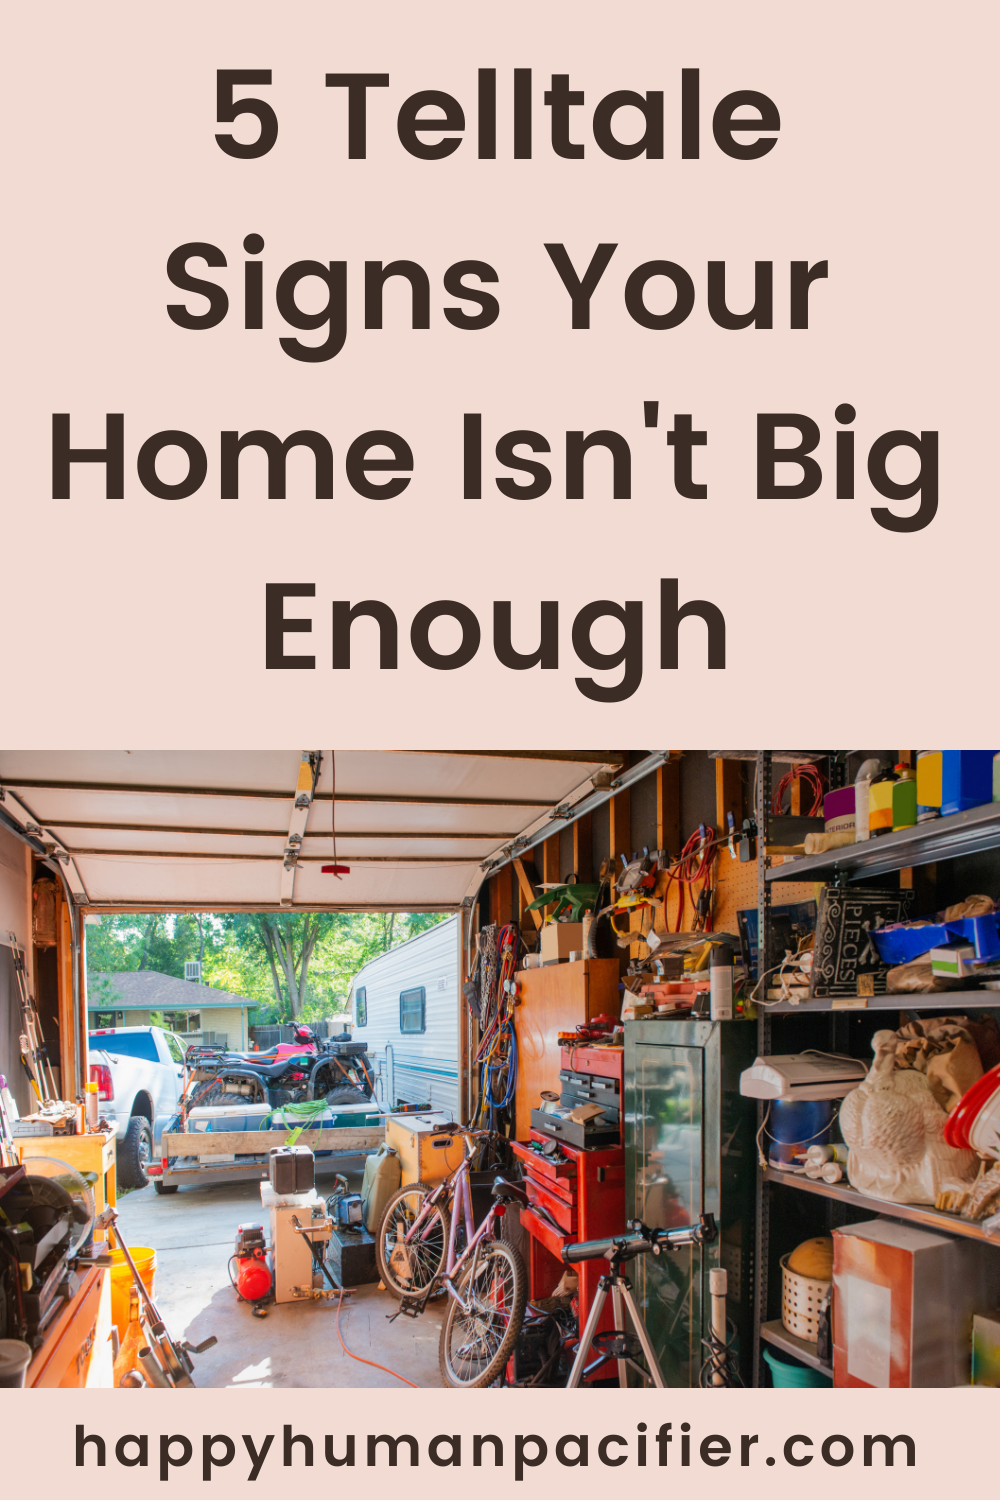 Are you feeling that your living space is limited and it may be time to move? Here are 5 telltale signs your home isn't big enough for your growing family.